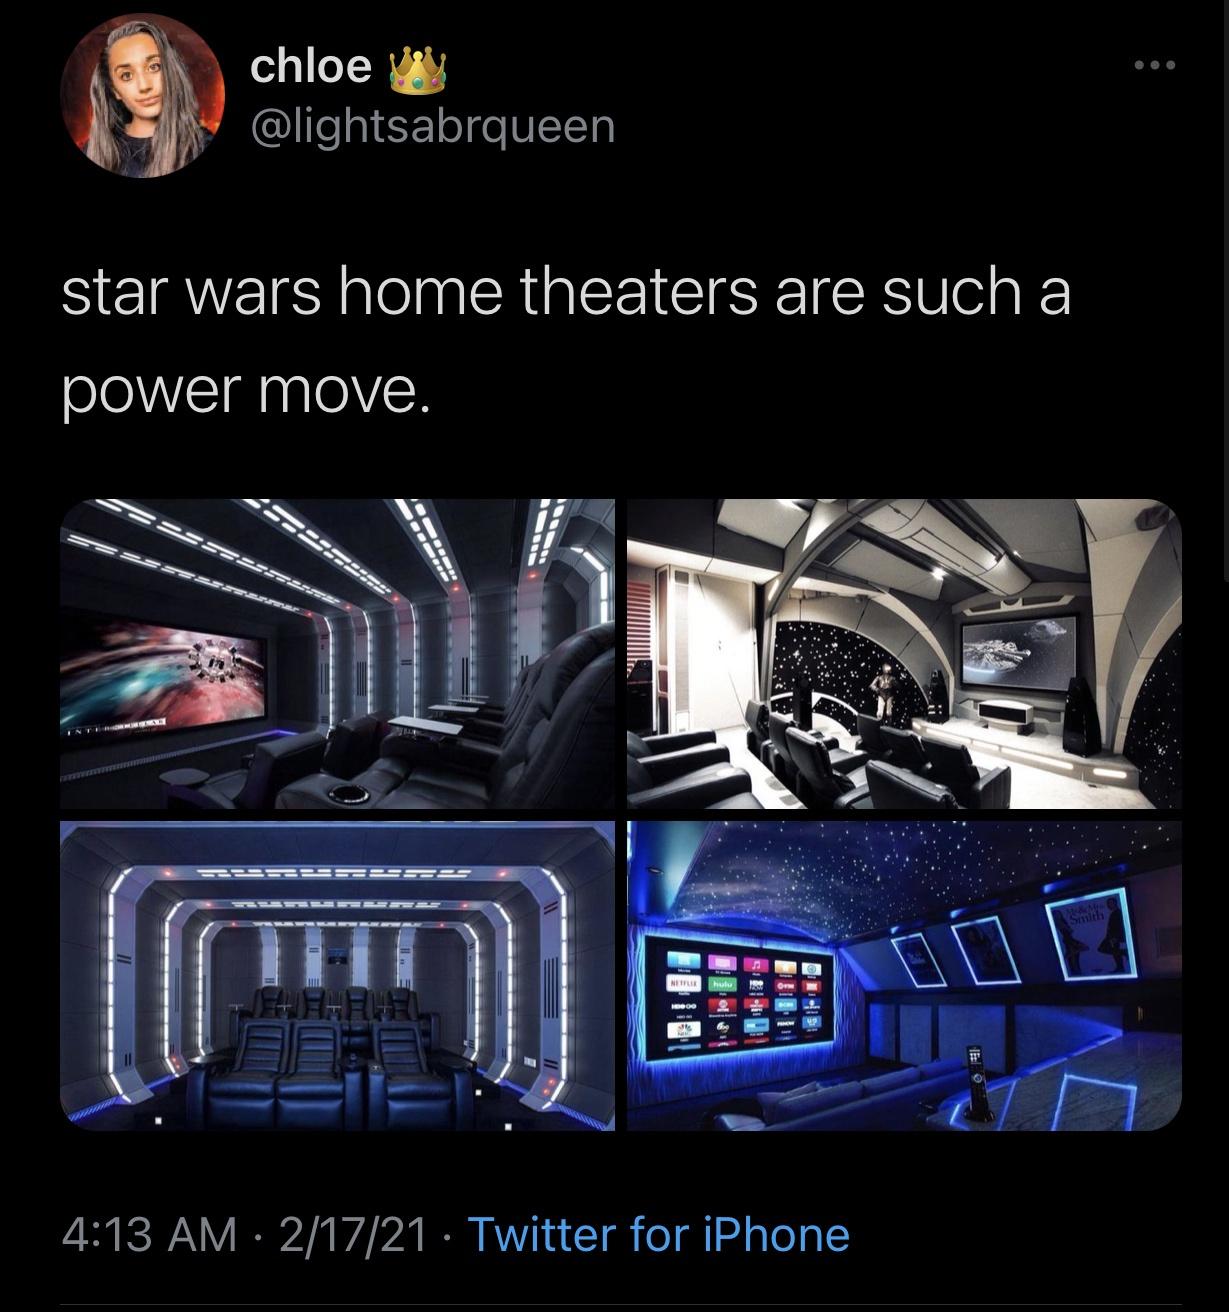 home theater rooms - chloe star wars home theaters are such a power move. S Sepedesees 21721 Twitter for iPhone